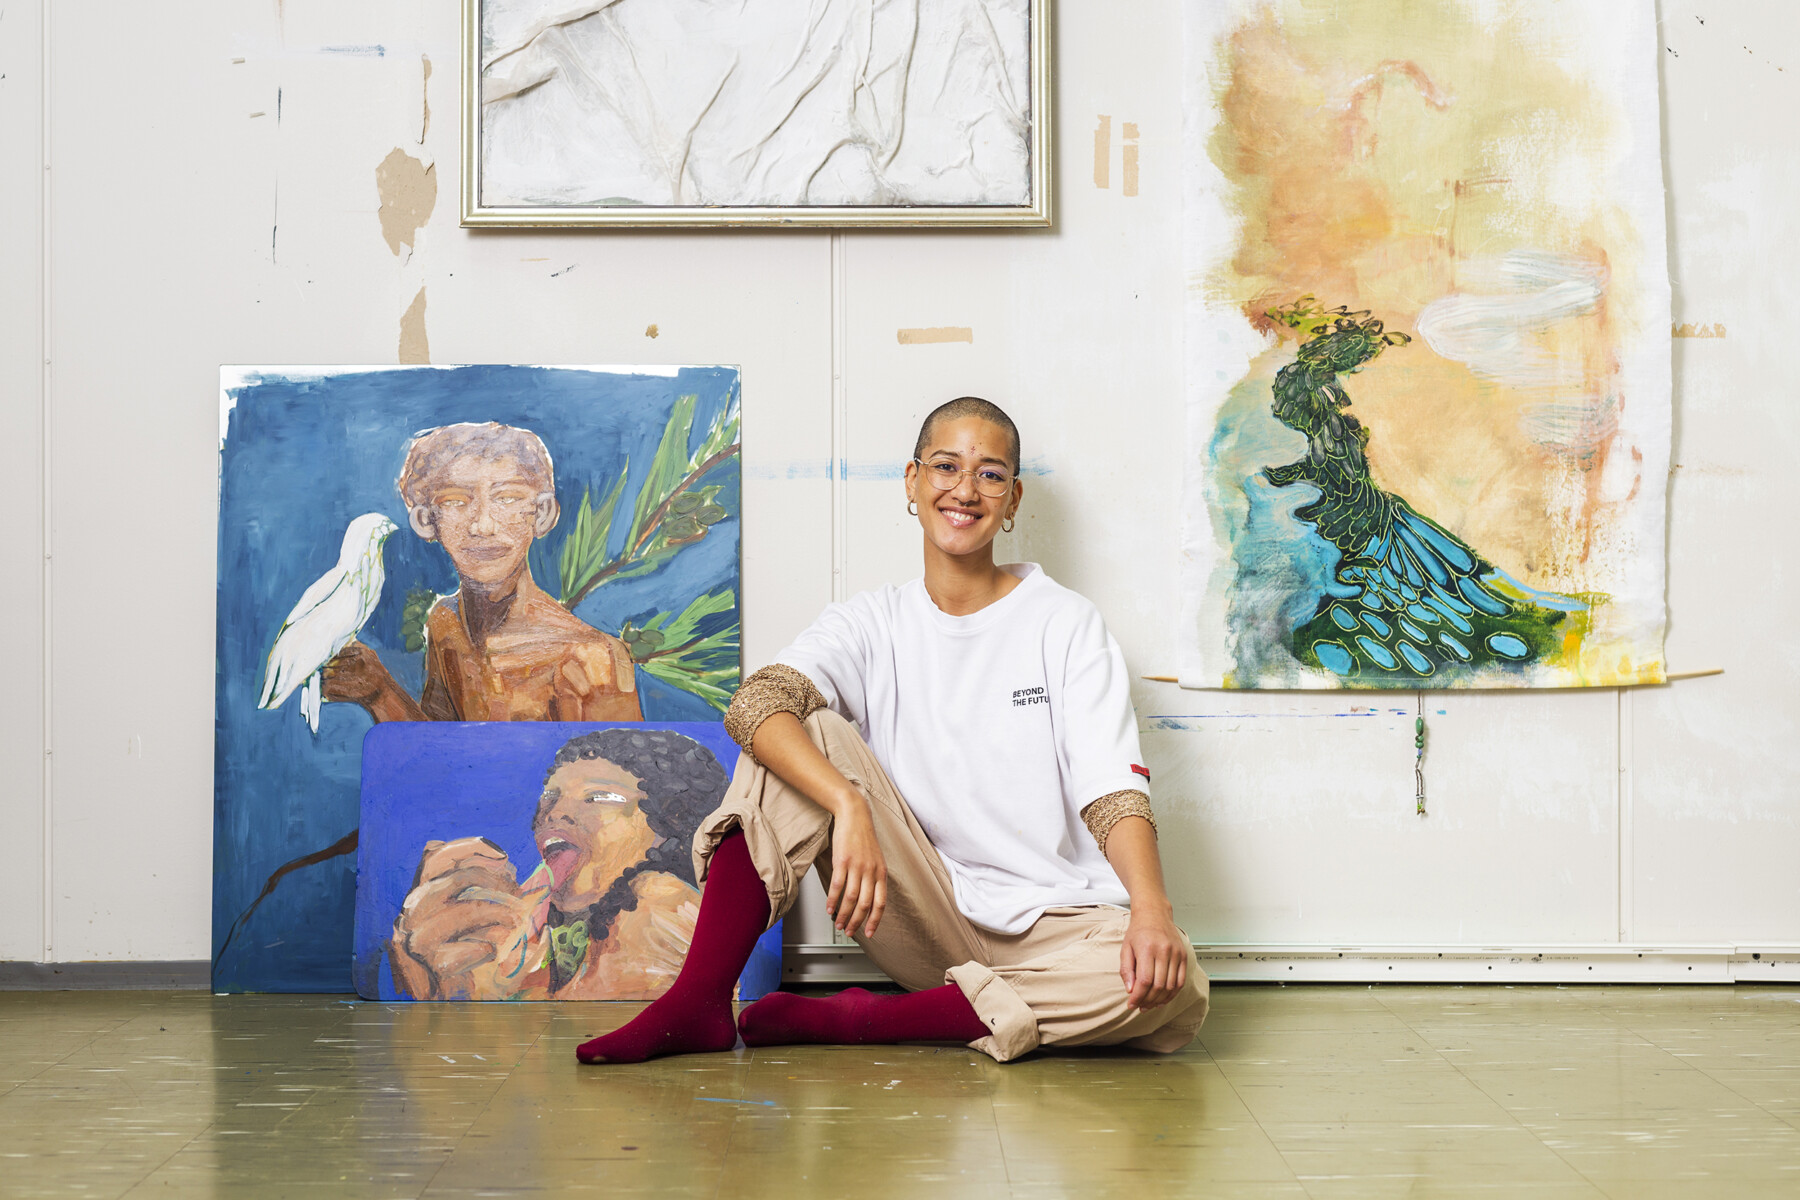 A person with very short hair is sitting on the floor in an art studio with paintings on the wall.